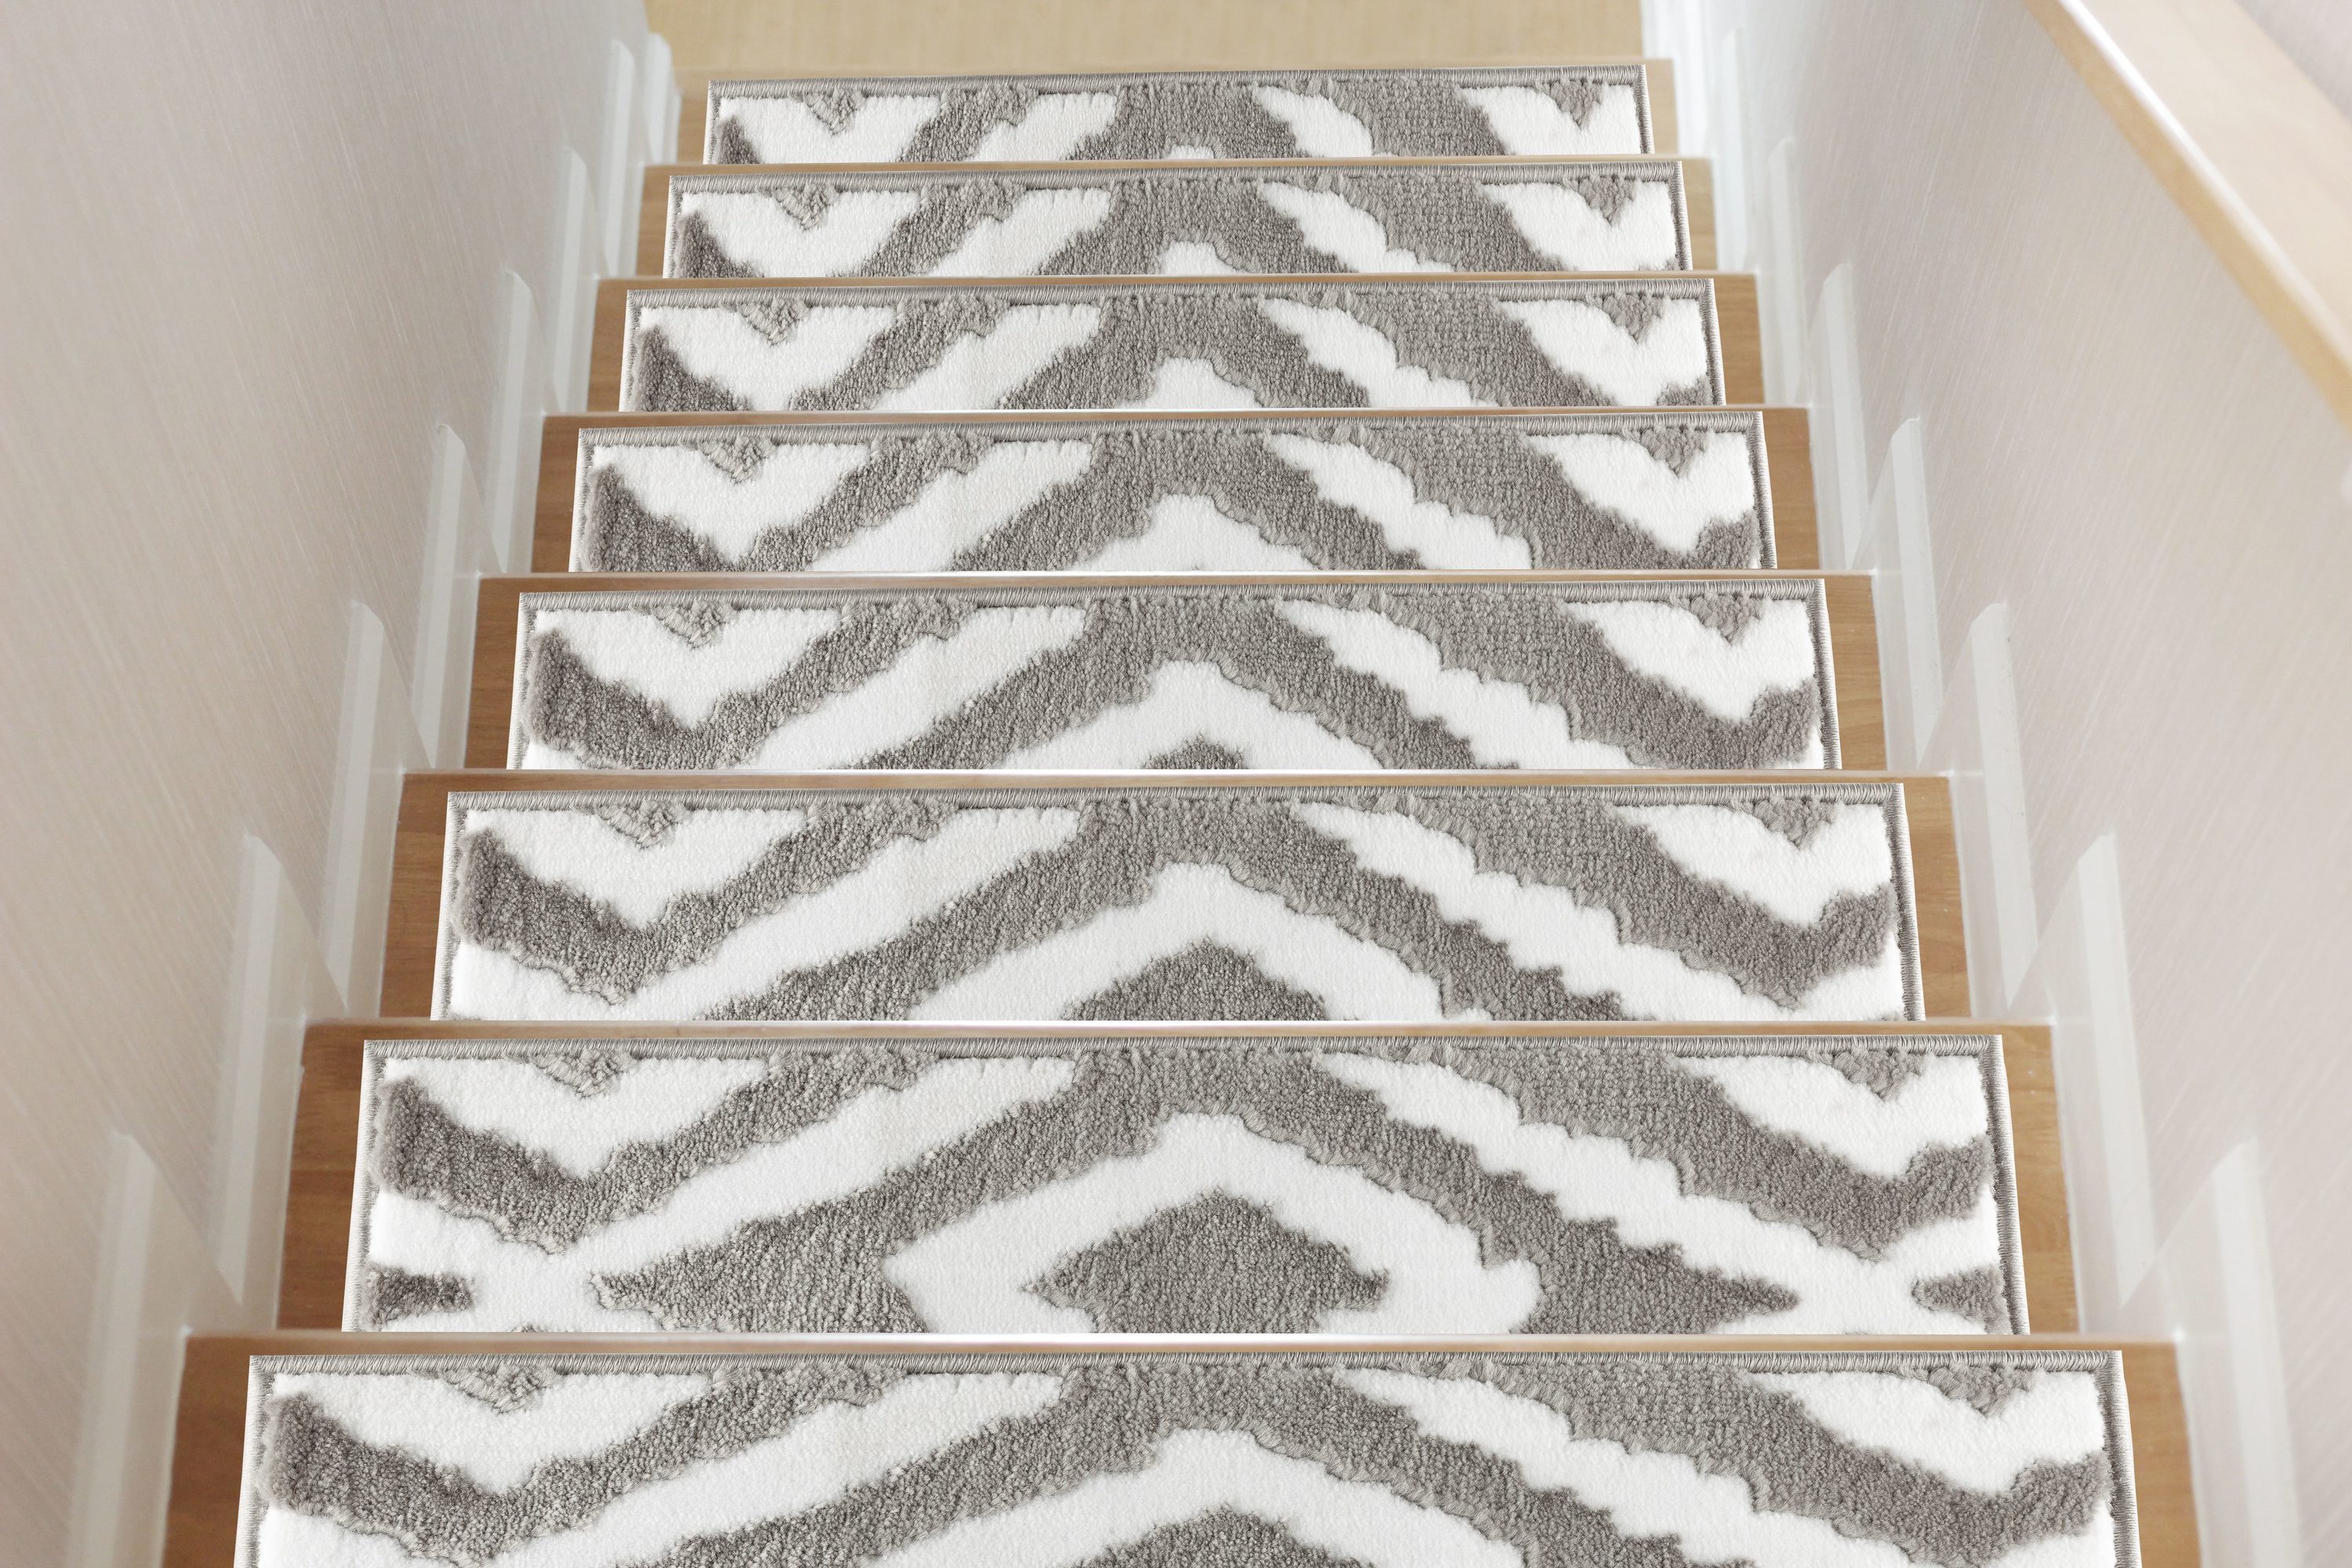 Ivory Cream Skid Resistant Carpet Stair Treads With Matching Rug